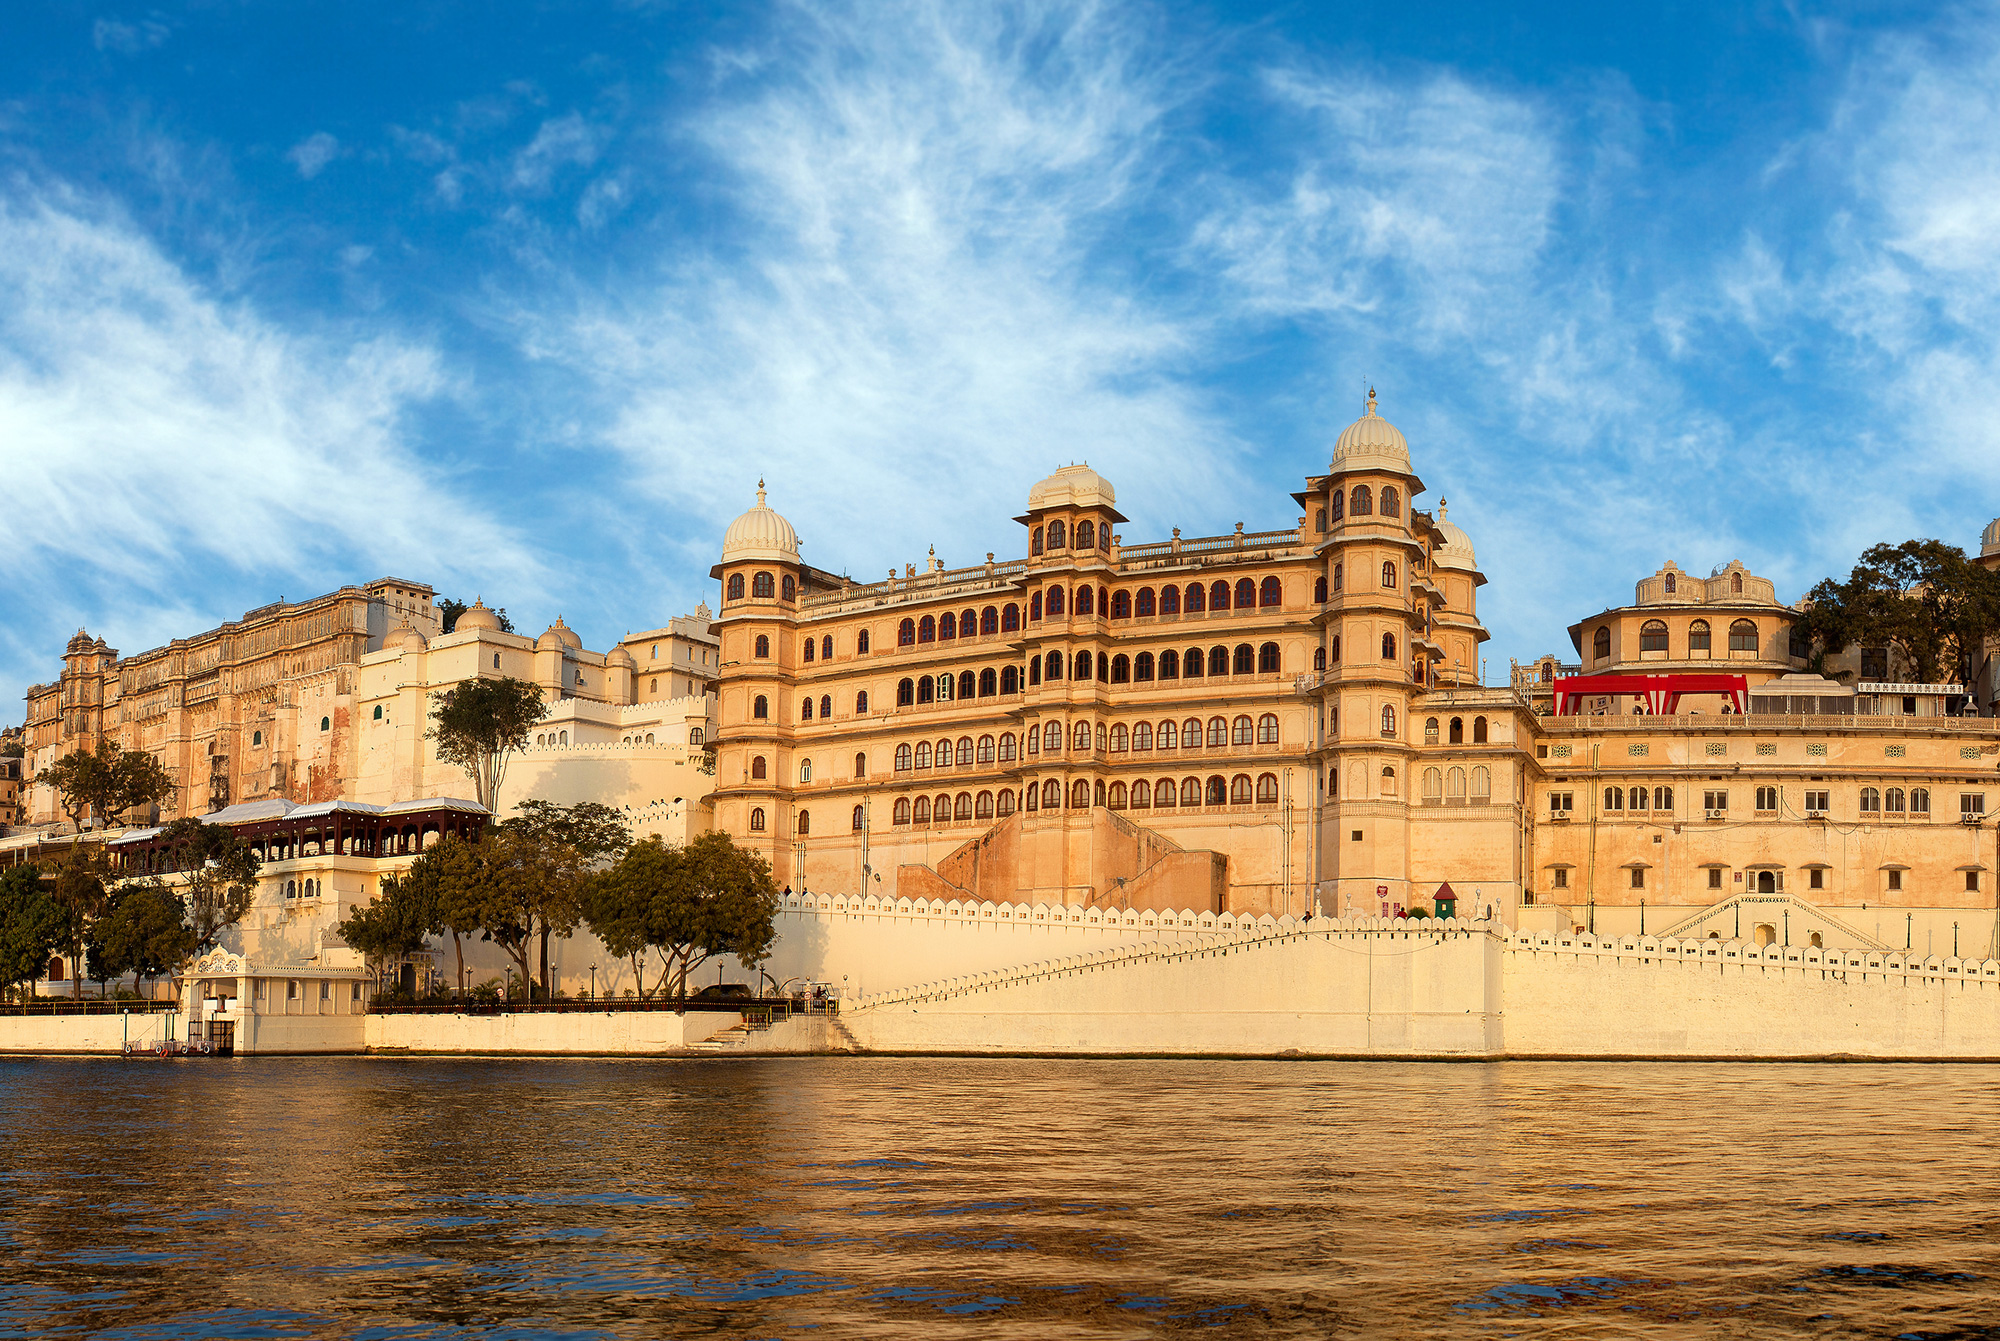 Day 4 - Udaipur: City of Lake